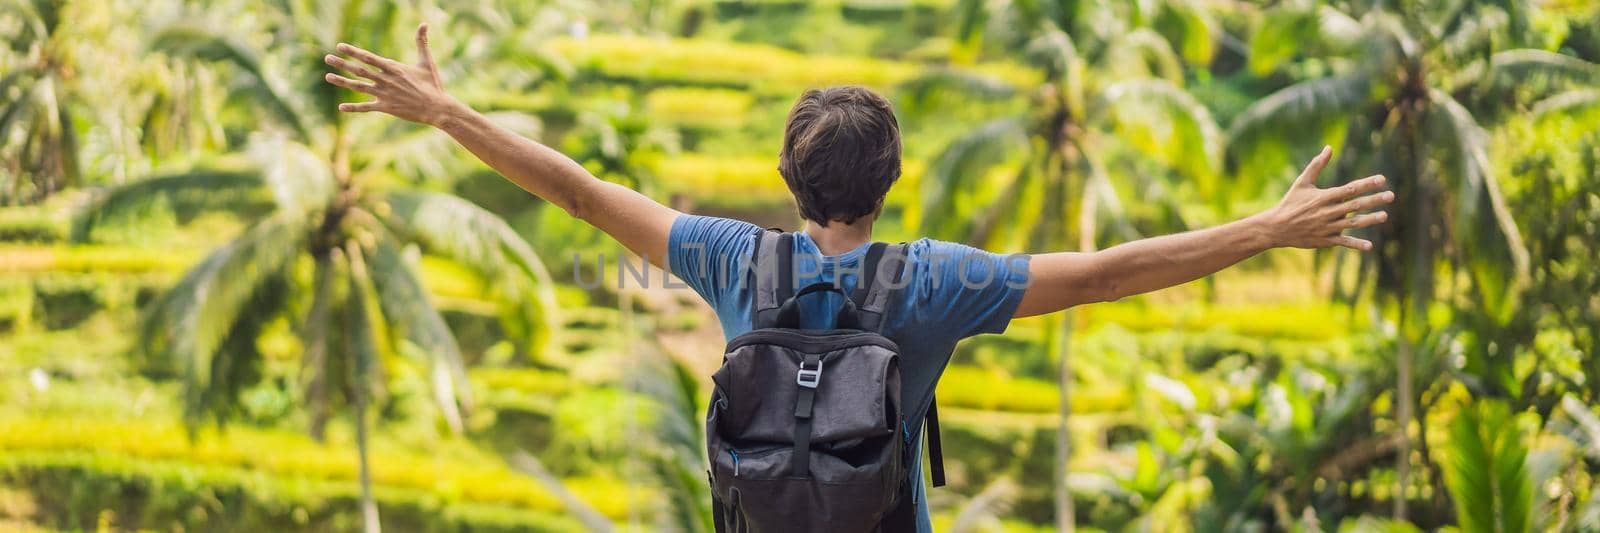 Male tourist with a backpack goes on the rice field. BANNER, LONG FORMAT